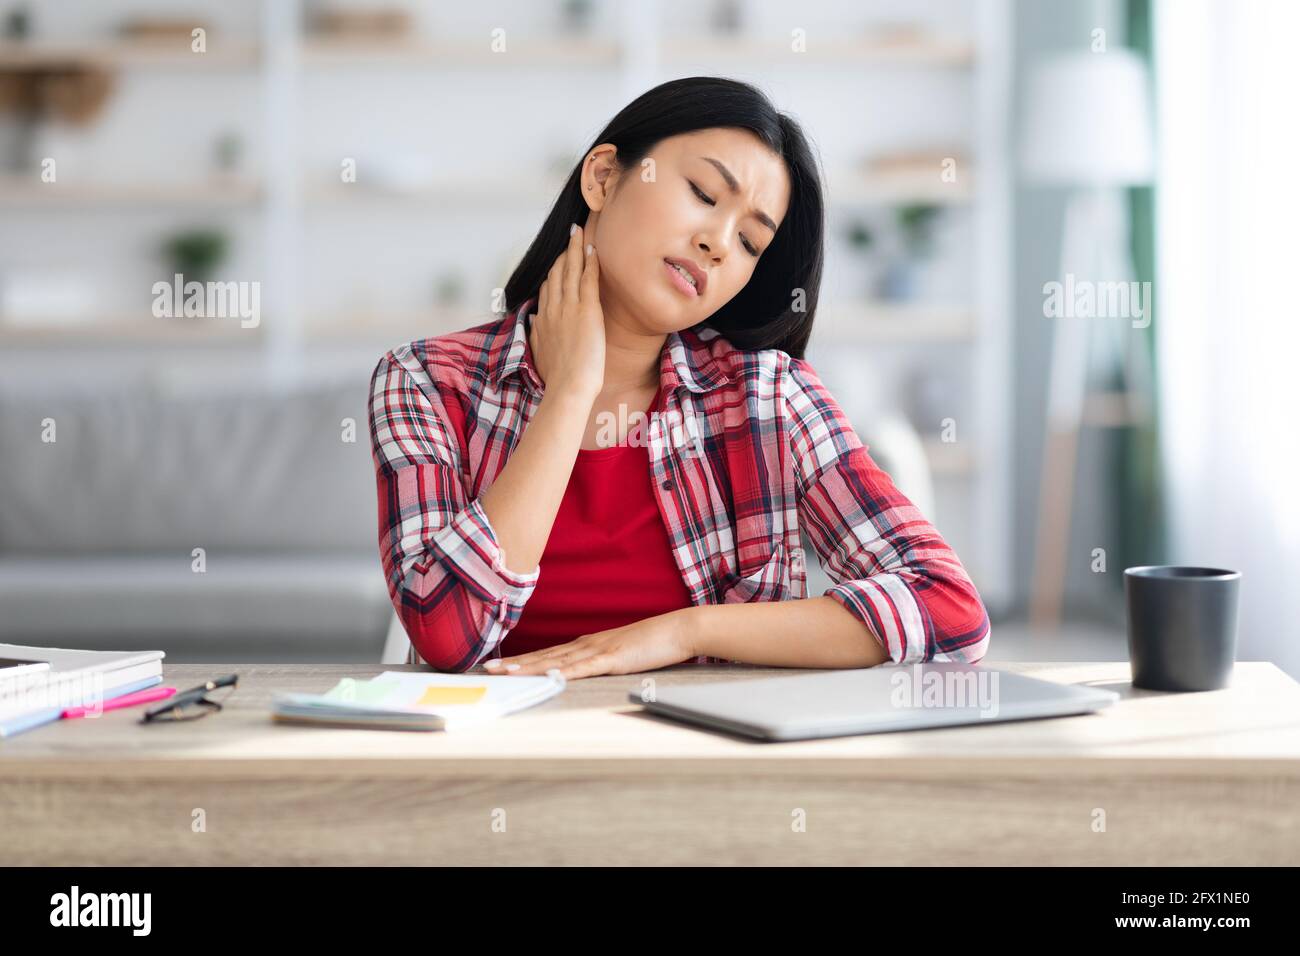 Neck Pain. Tired Asian Female Massaging Inflamed Neck After Working On Laptop Stock Photo